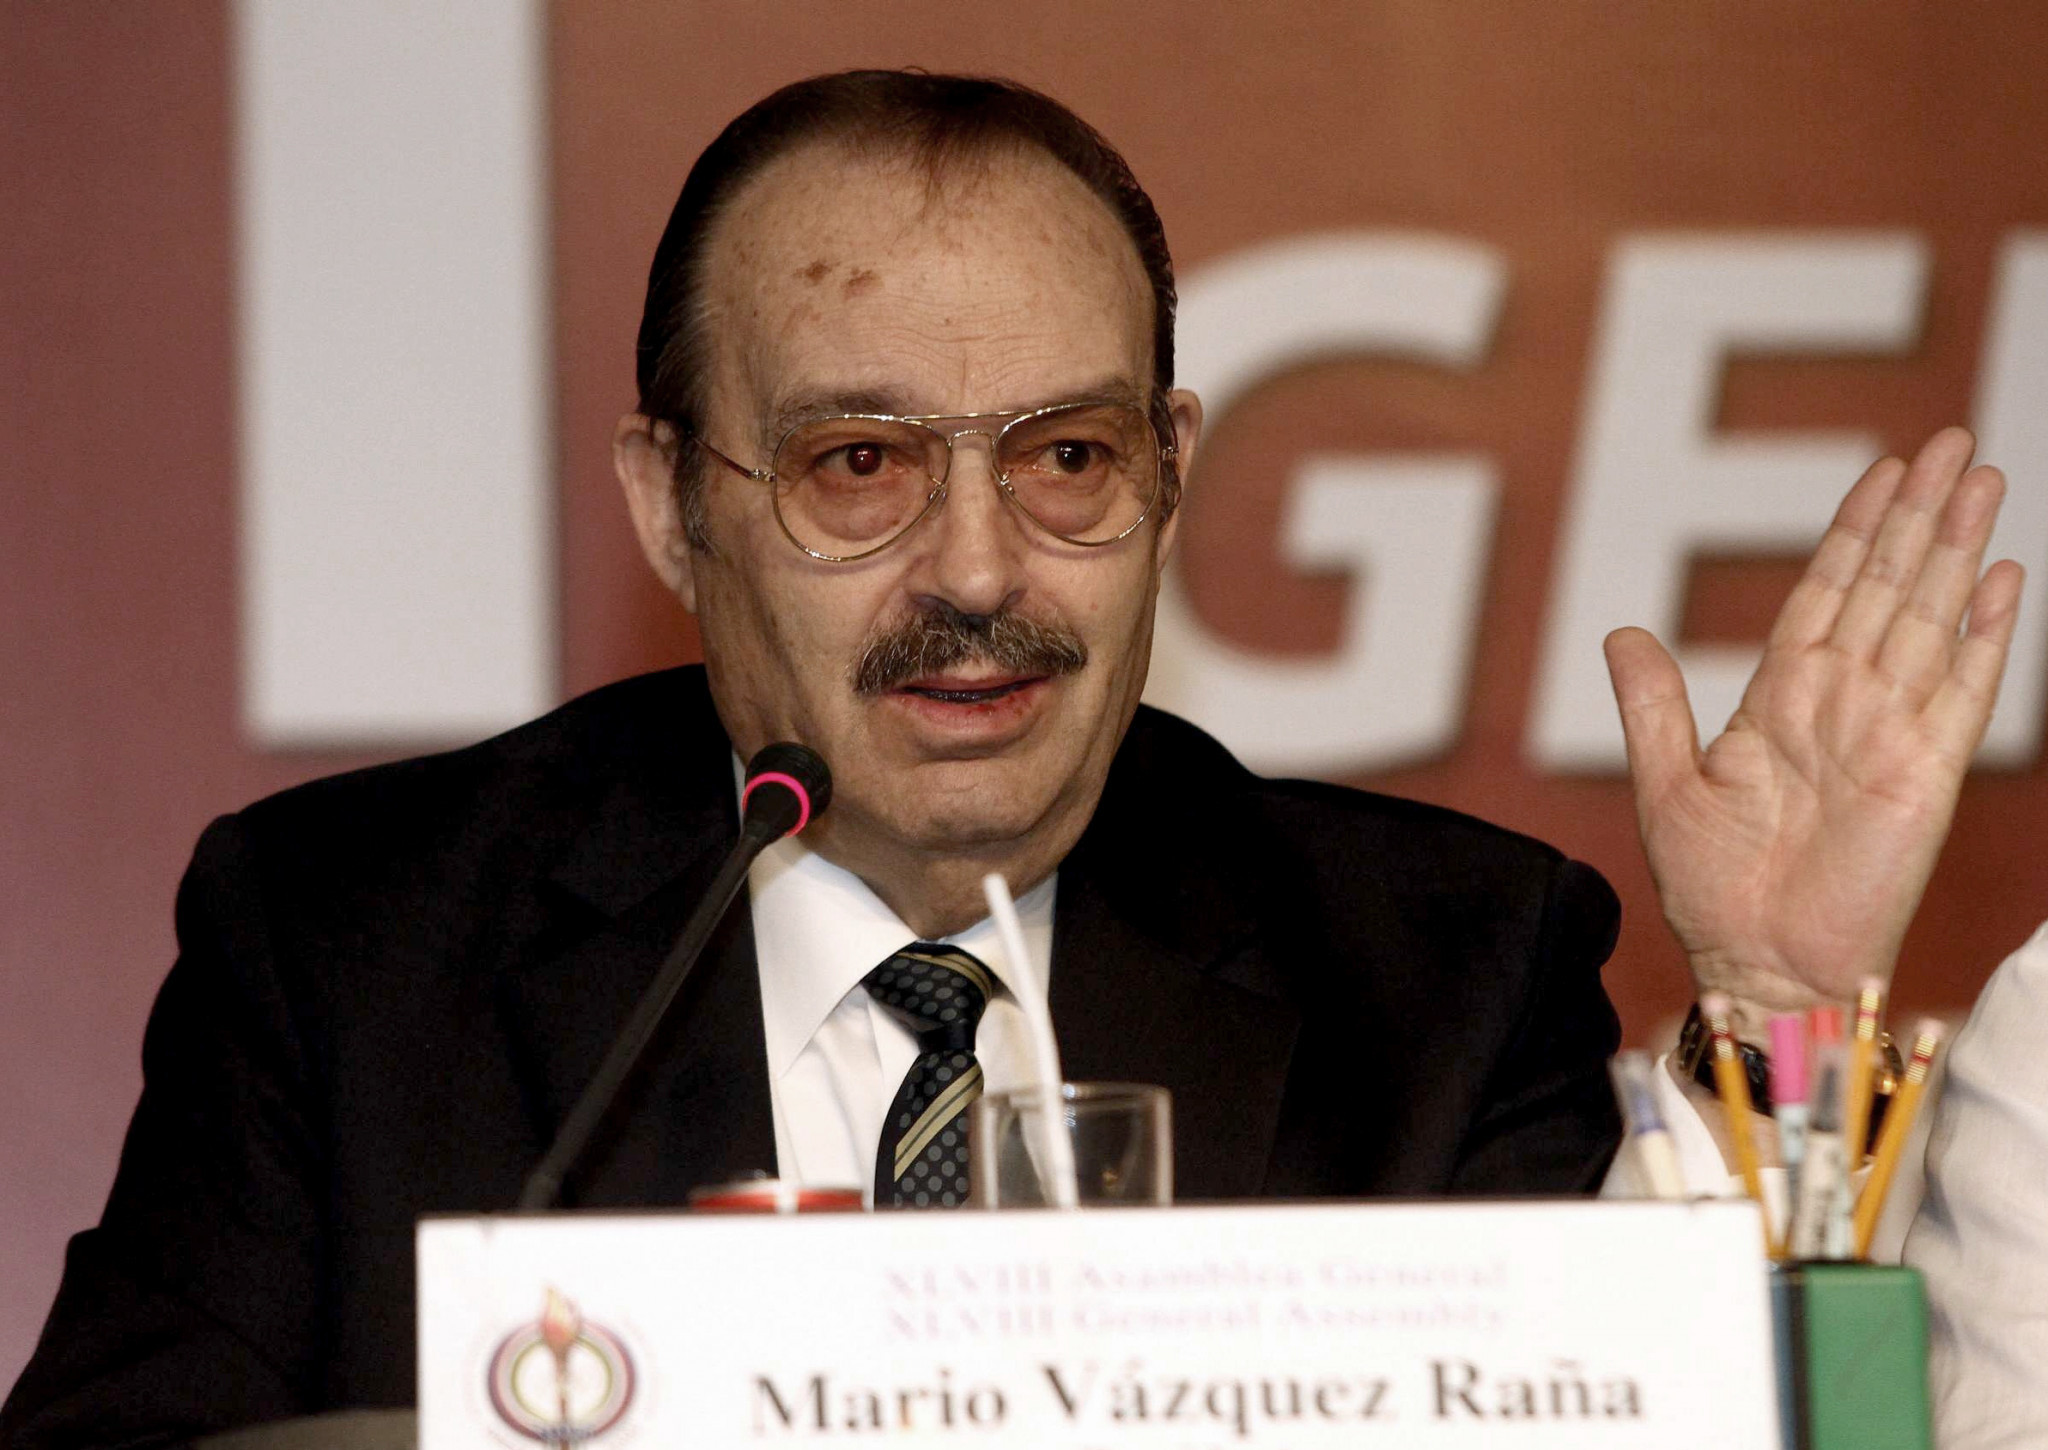 Sports administration runs in the family as his late brother Mario Vázquez Raña headed up ANOC for 30 years ©Getty Images